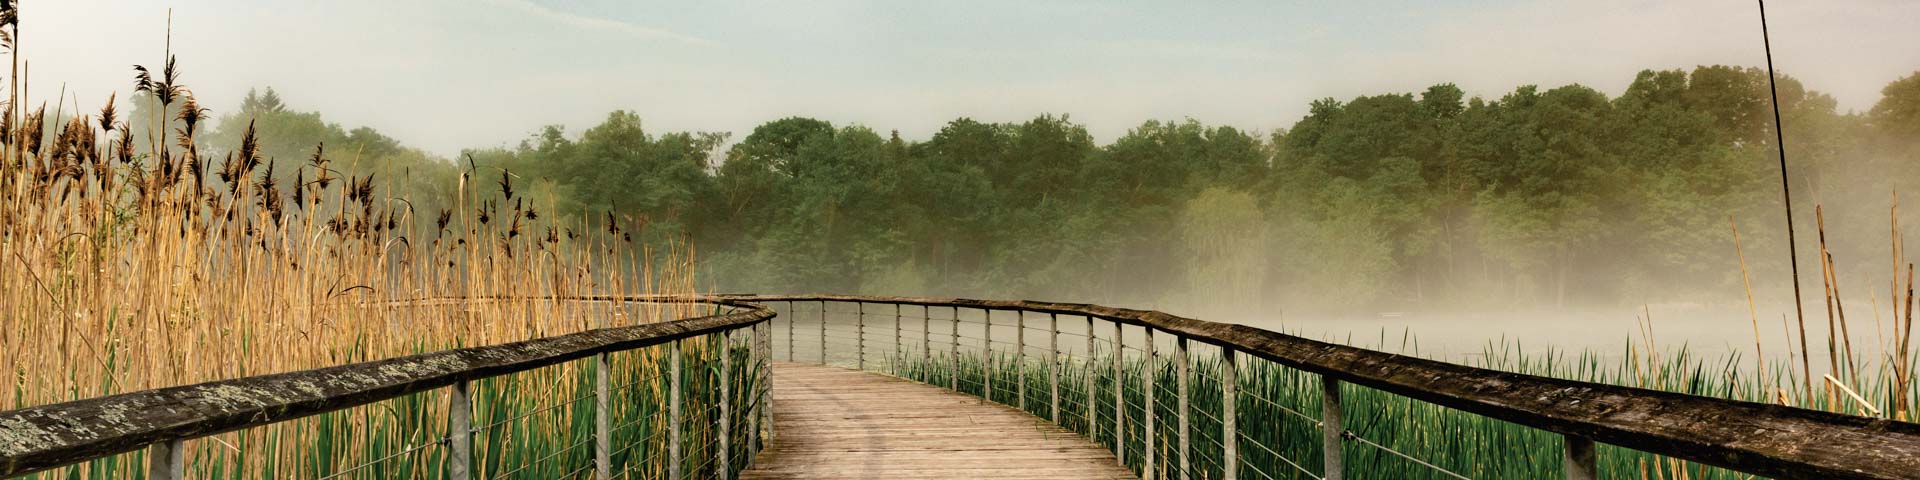 A wooden boardwalk extends into a misty wetland with tall reeds and leads toward a lush forest.